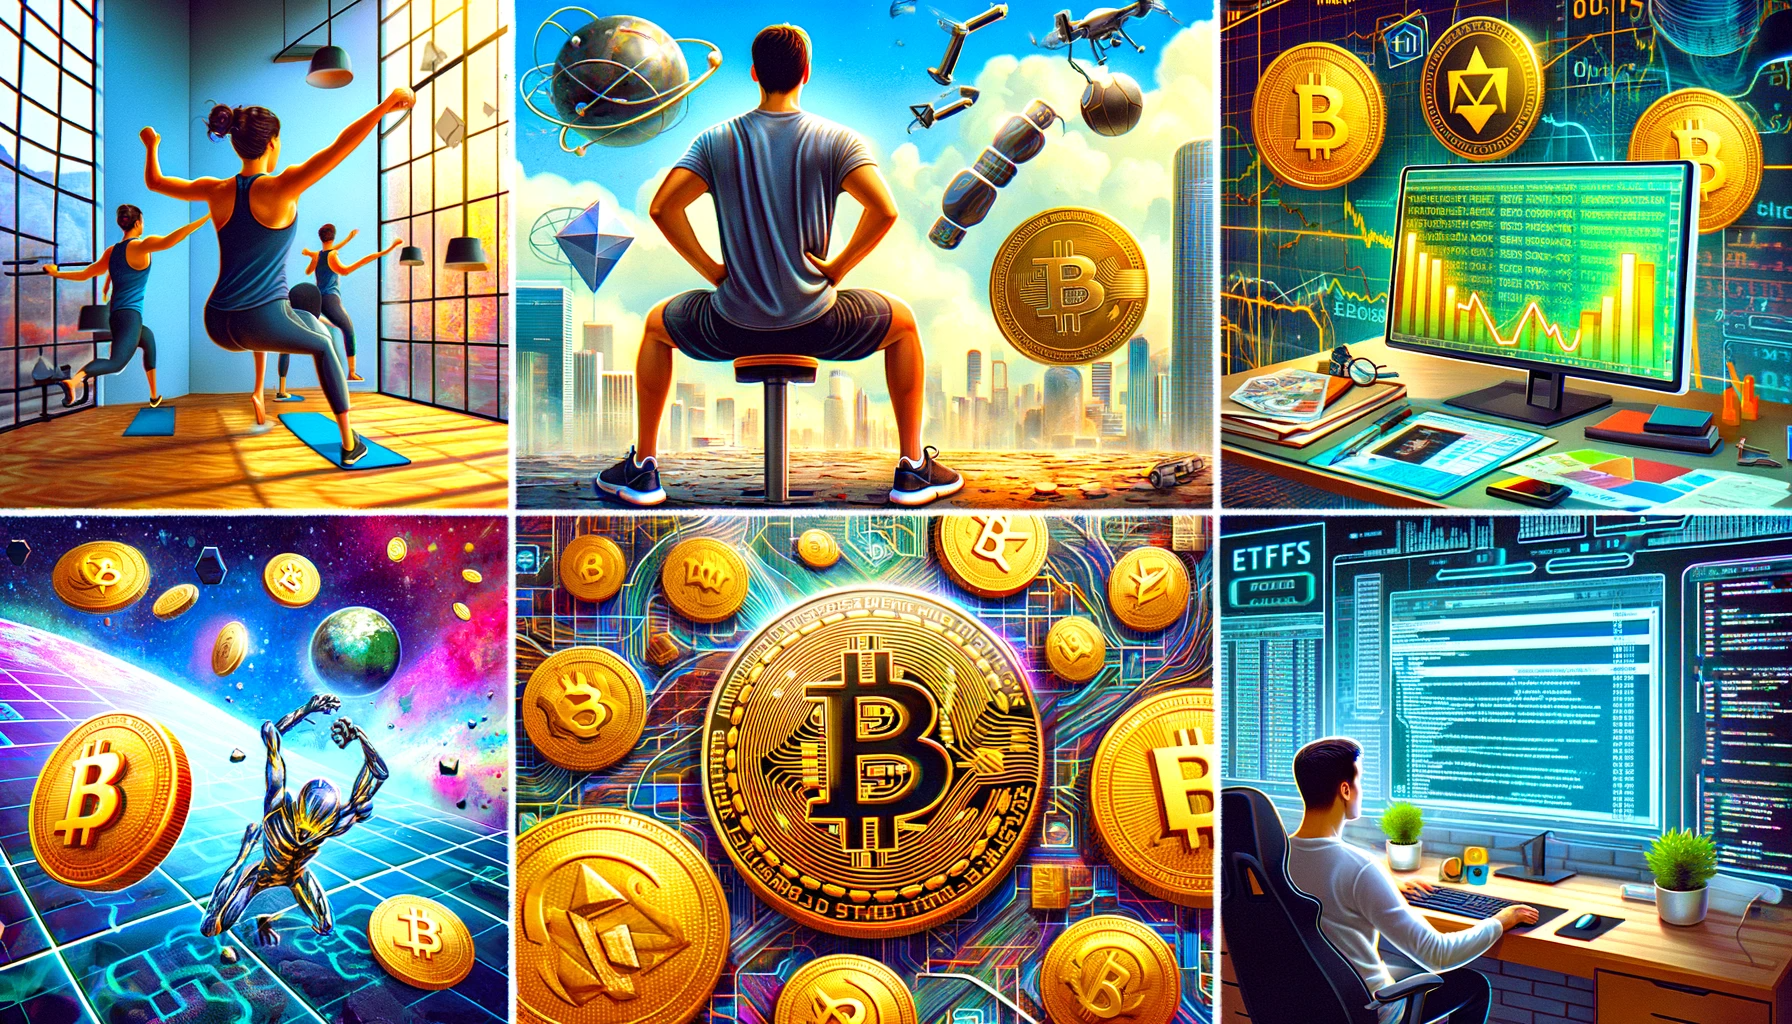 A collage for a blog post featuring six different themes: 1) A person doing equipment-free exercises like push-ups or squats at home. 2) An abstract representation of Bitcoin and ETFs, like golden coins with the Bitcoin symbol and documents or graphs. 3) Futuristic elements and gaming graphics inspired by a popular puzzle-platform game. 4) A computer screen displaying code and a certification badge, symbolizing tech education and certifications. 5) A juxtaposition of a corporate office setting with a home office, representing remote work and office policies. 6) Various cryptocurrencies, like coins and digital symbols, depicting the crypto market. The image should be vibrant and engaging, capturing the essence of each theme.